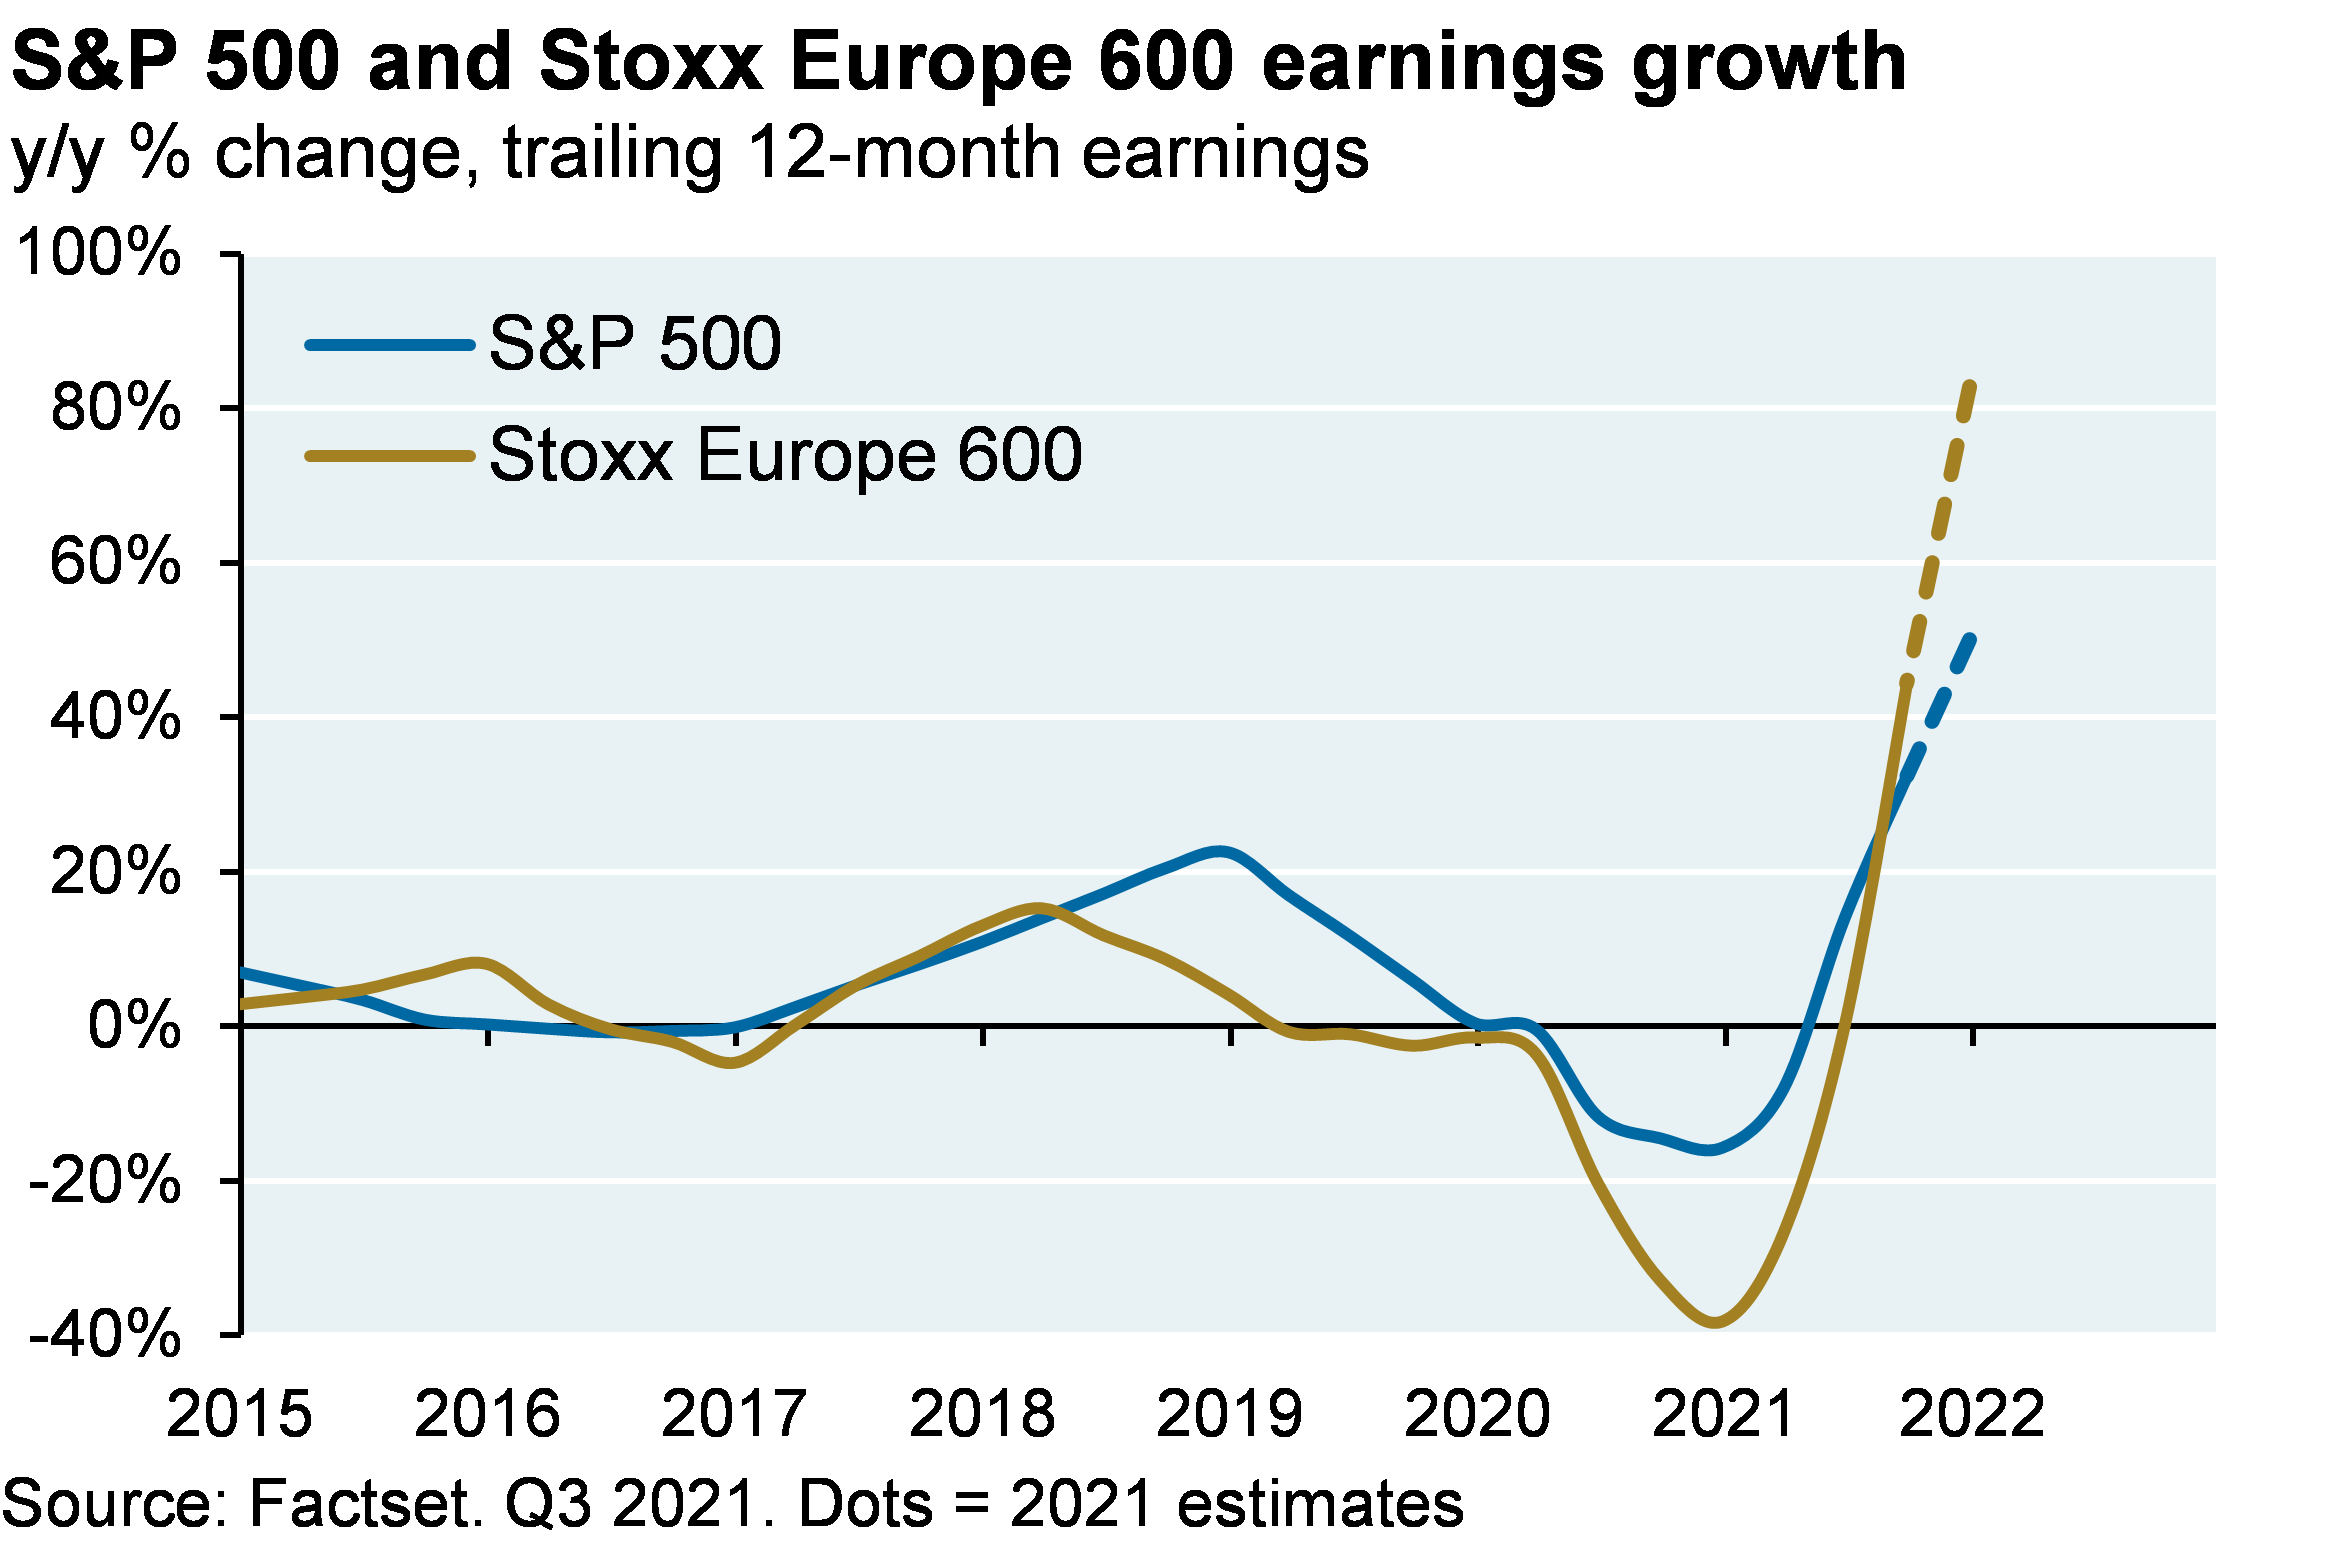 Line chart shows the y/y % change in trailing 12-month earnings for the S&P 500 and the Stoxx Europe 600. Chart shows that earnings recovered from negative growth in 2020 to 40% earnings growth for the Stoxx Europe 600 and around 35% earnings growth for the S&P 500 as of Q3 2021, with both expected to increase further by year-end.